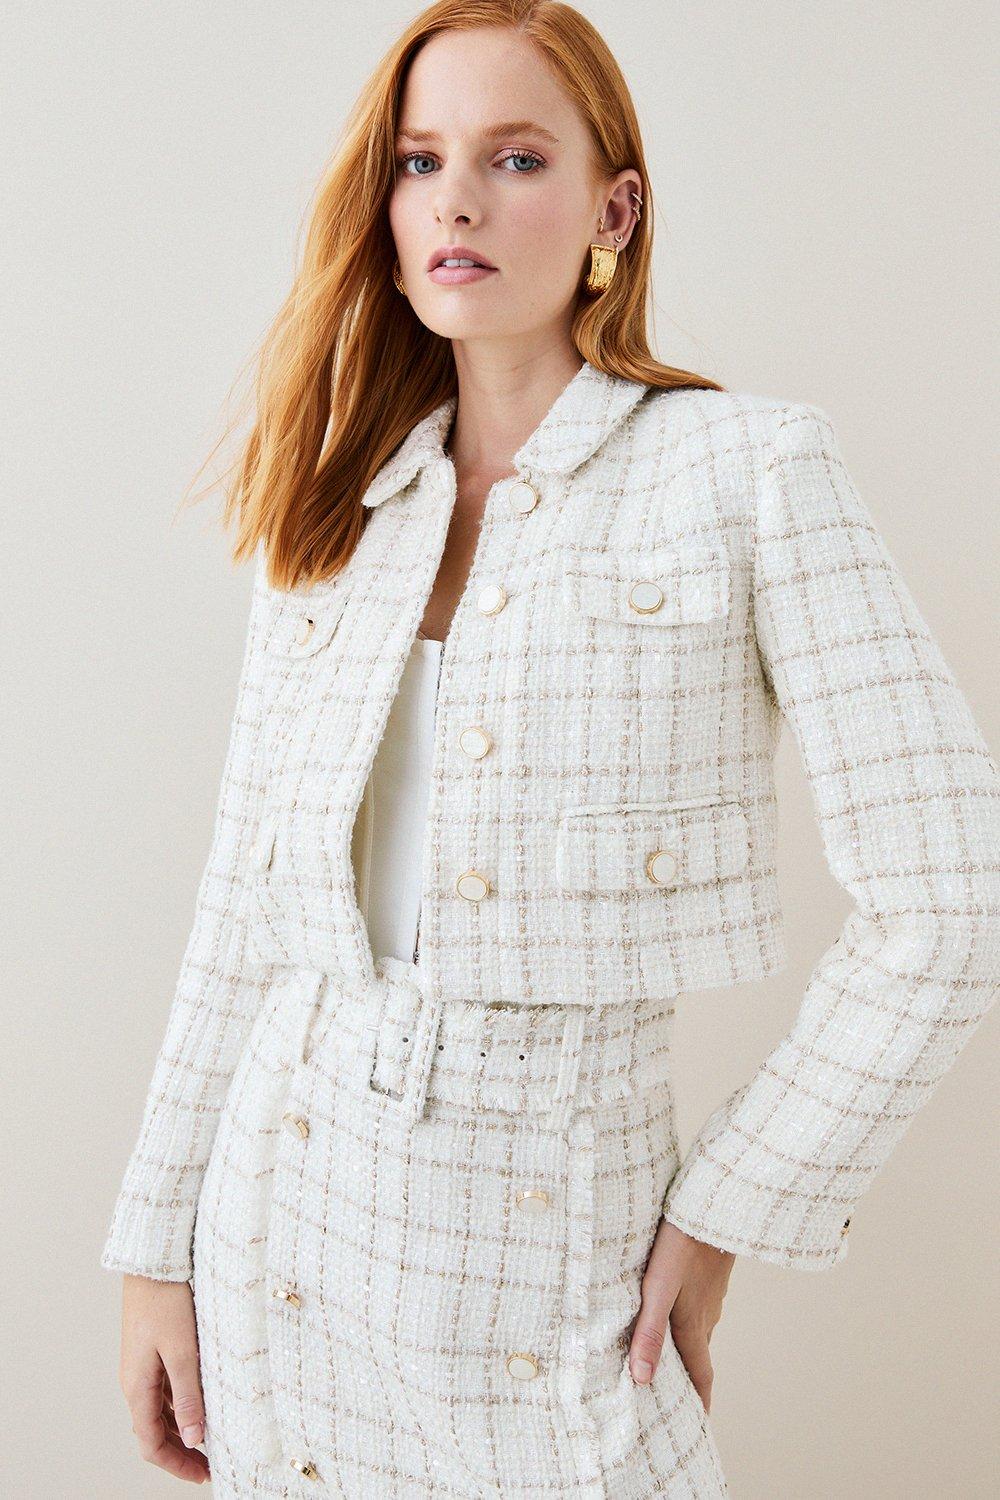 Tweed Button Front Trophy Jacket